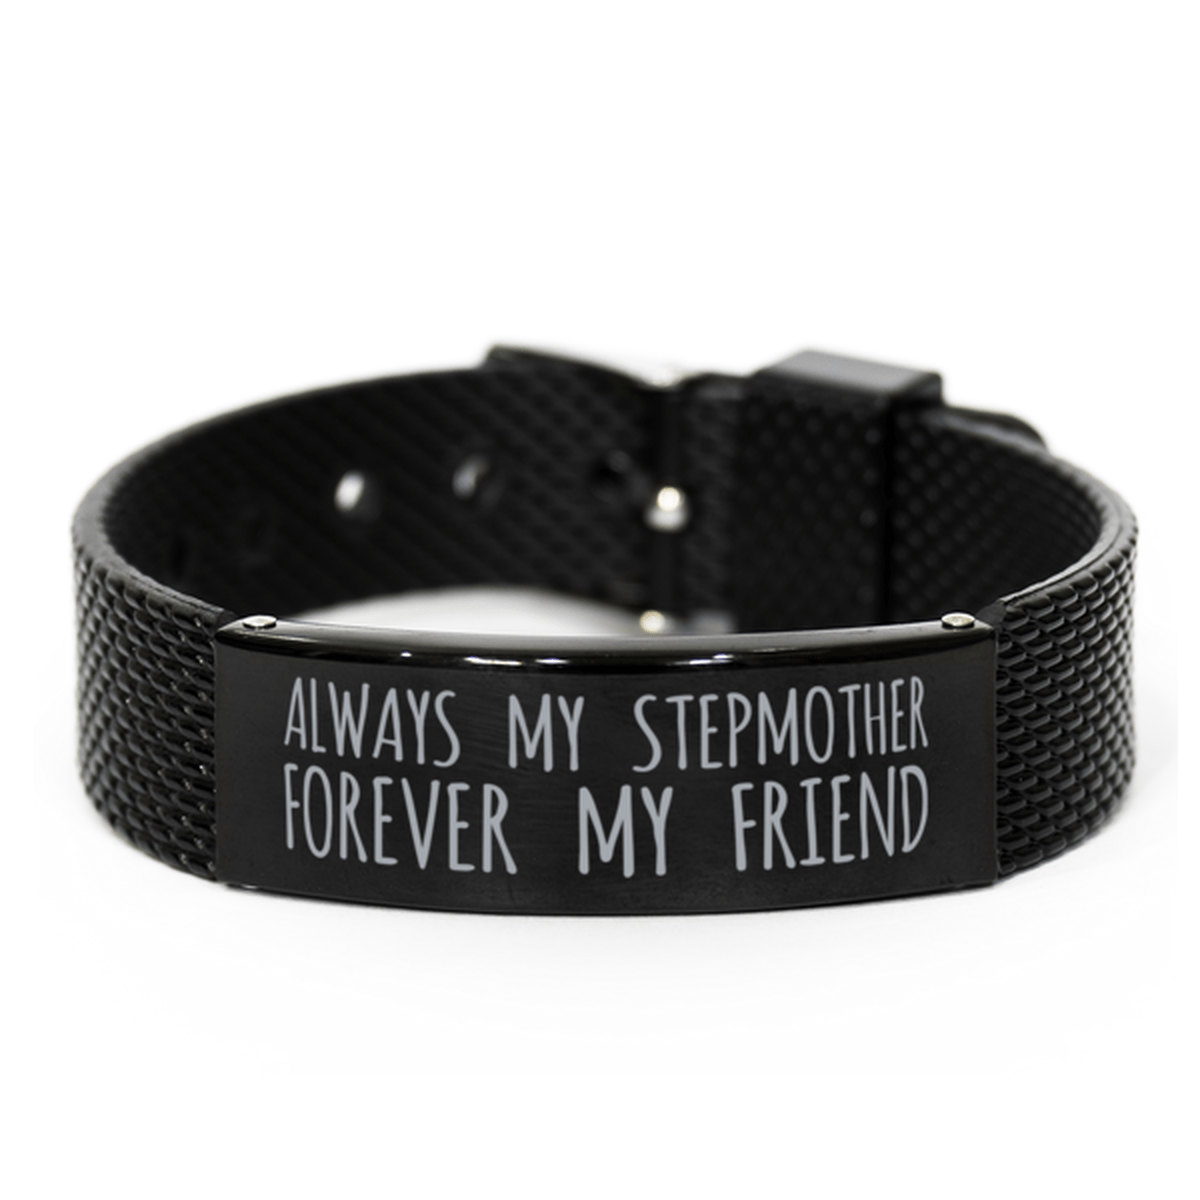 Inspirational Stepmother Black Shark Mesh Bracelet, Always My Stepmother Forever My Friend, Best Birthday Gifts for Family Friends